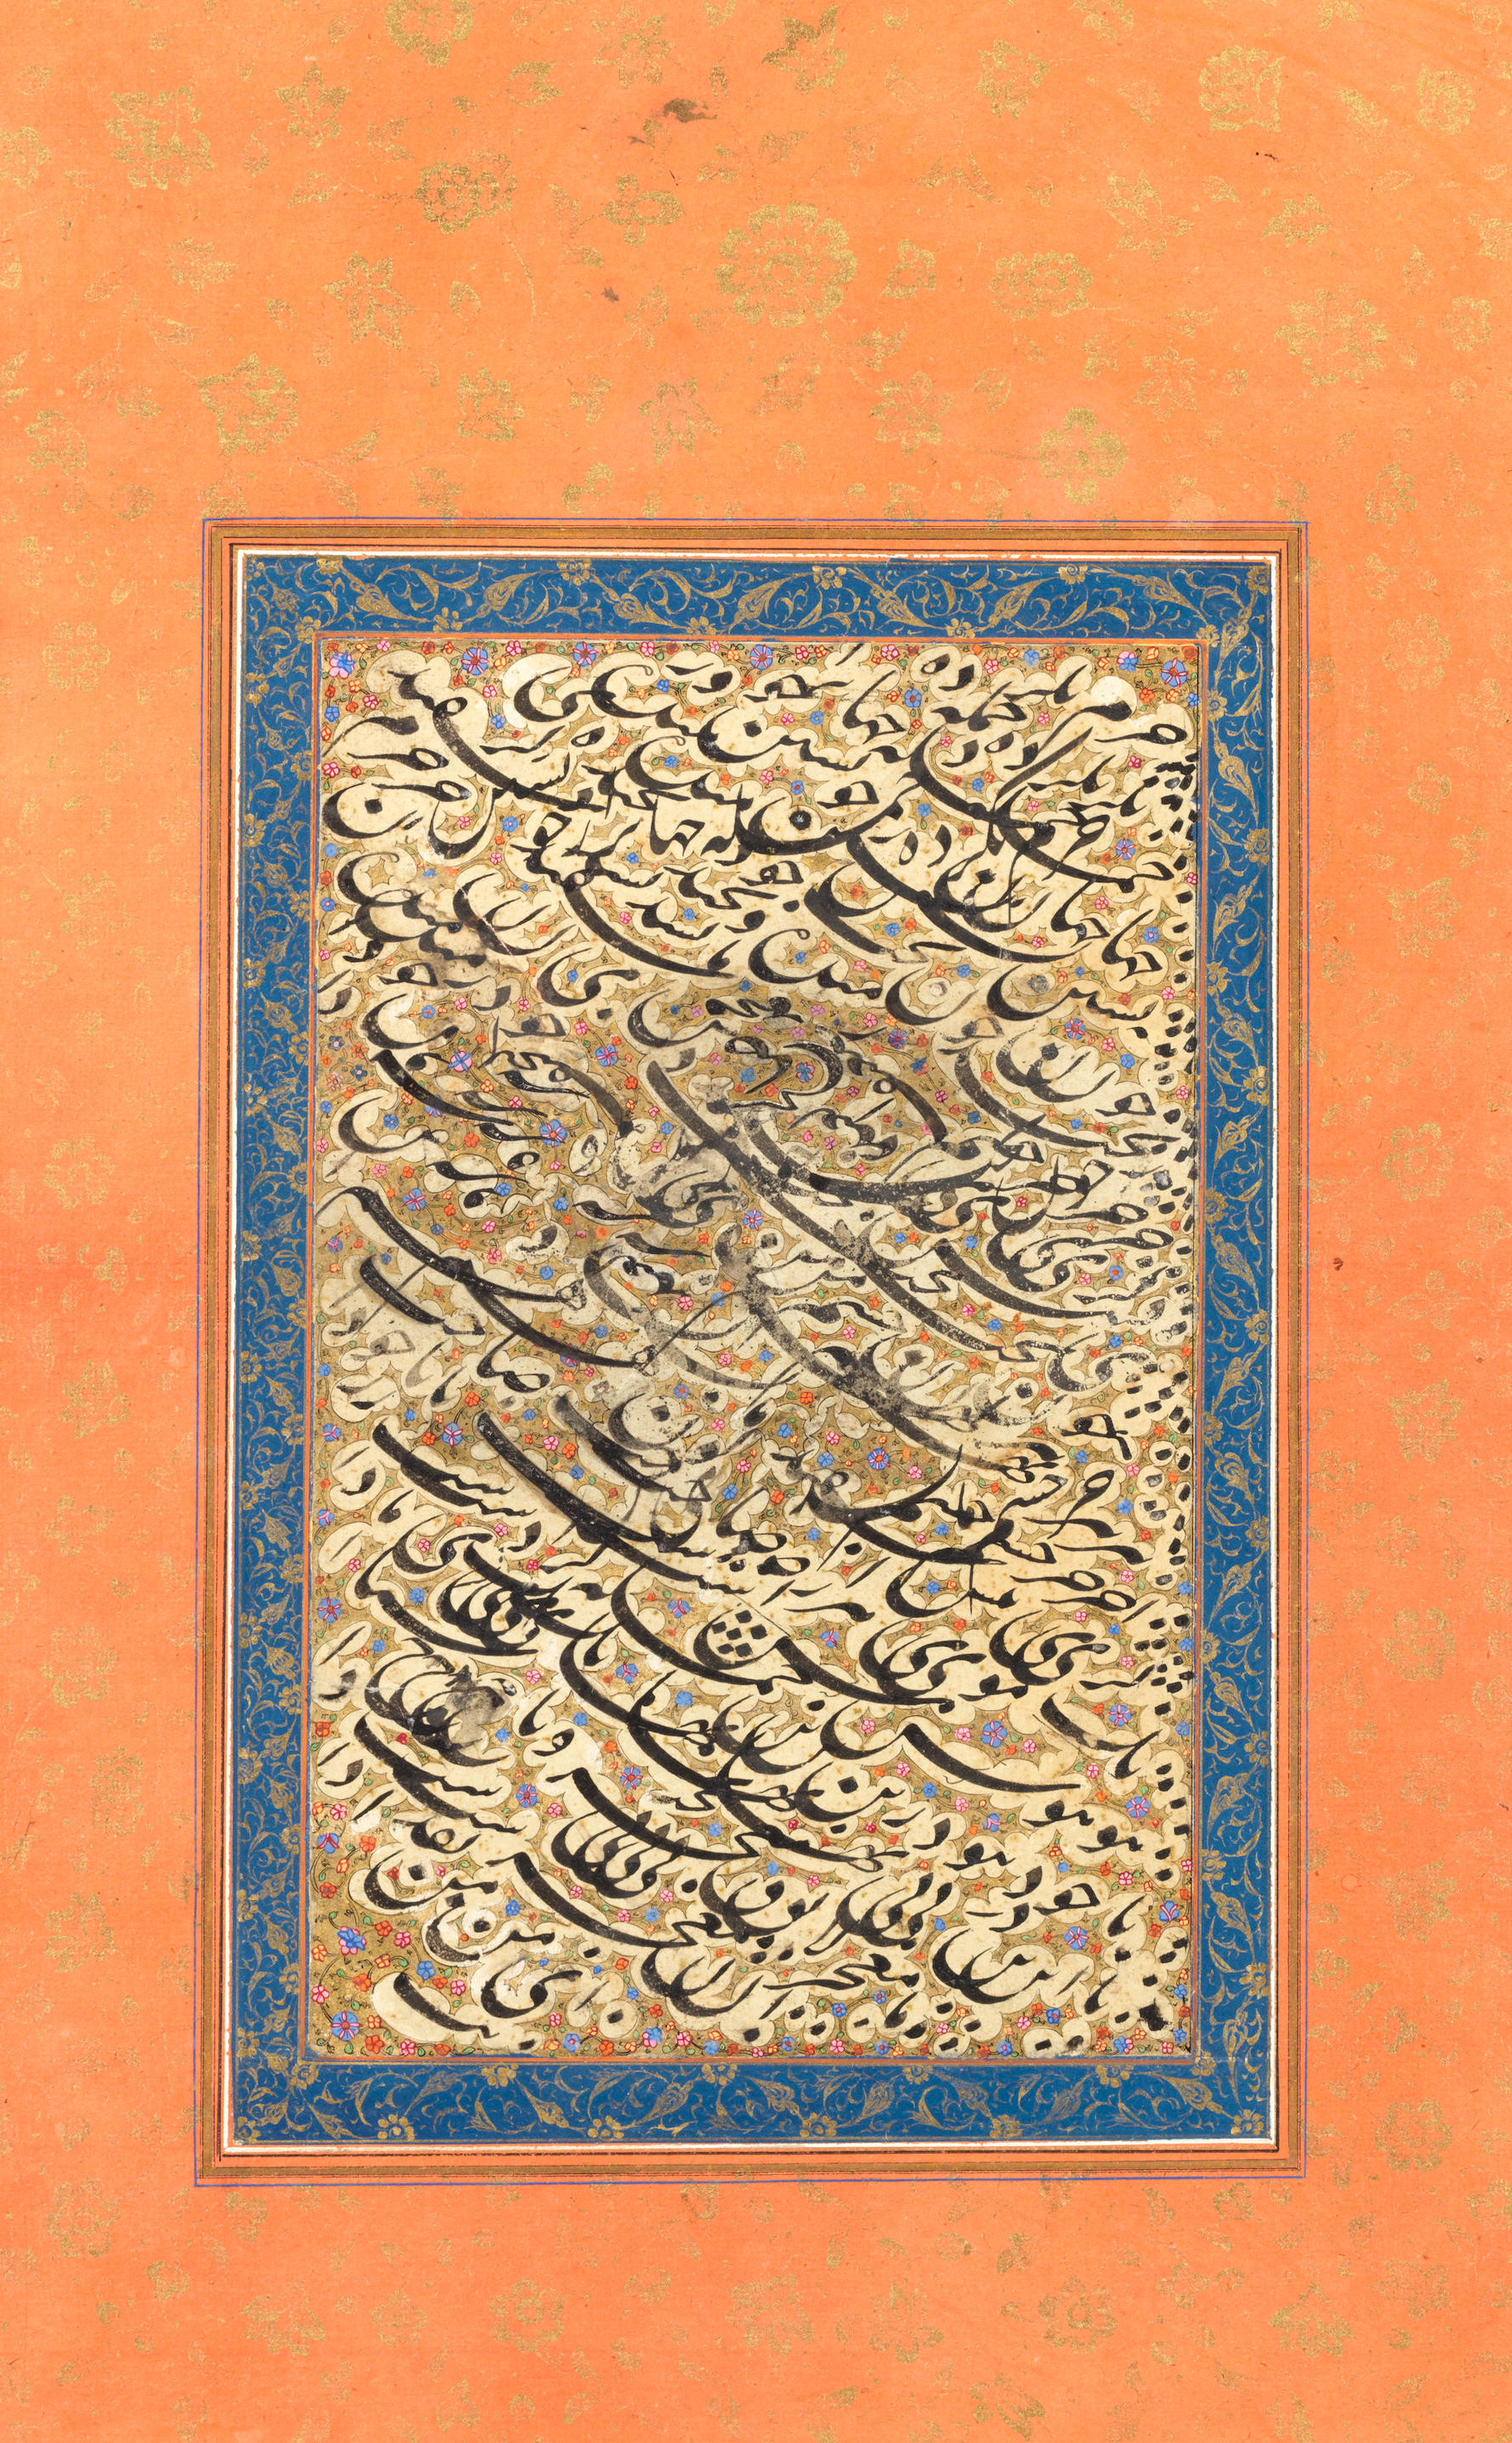 An album page of calligraphic practice writing (siyah mashq) in profuse...